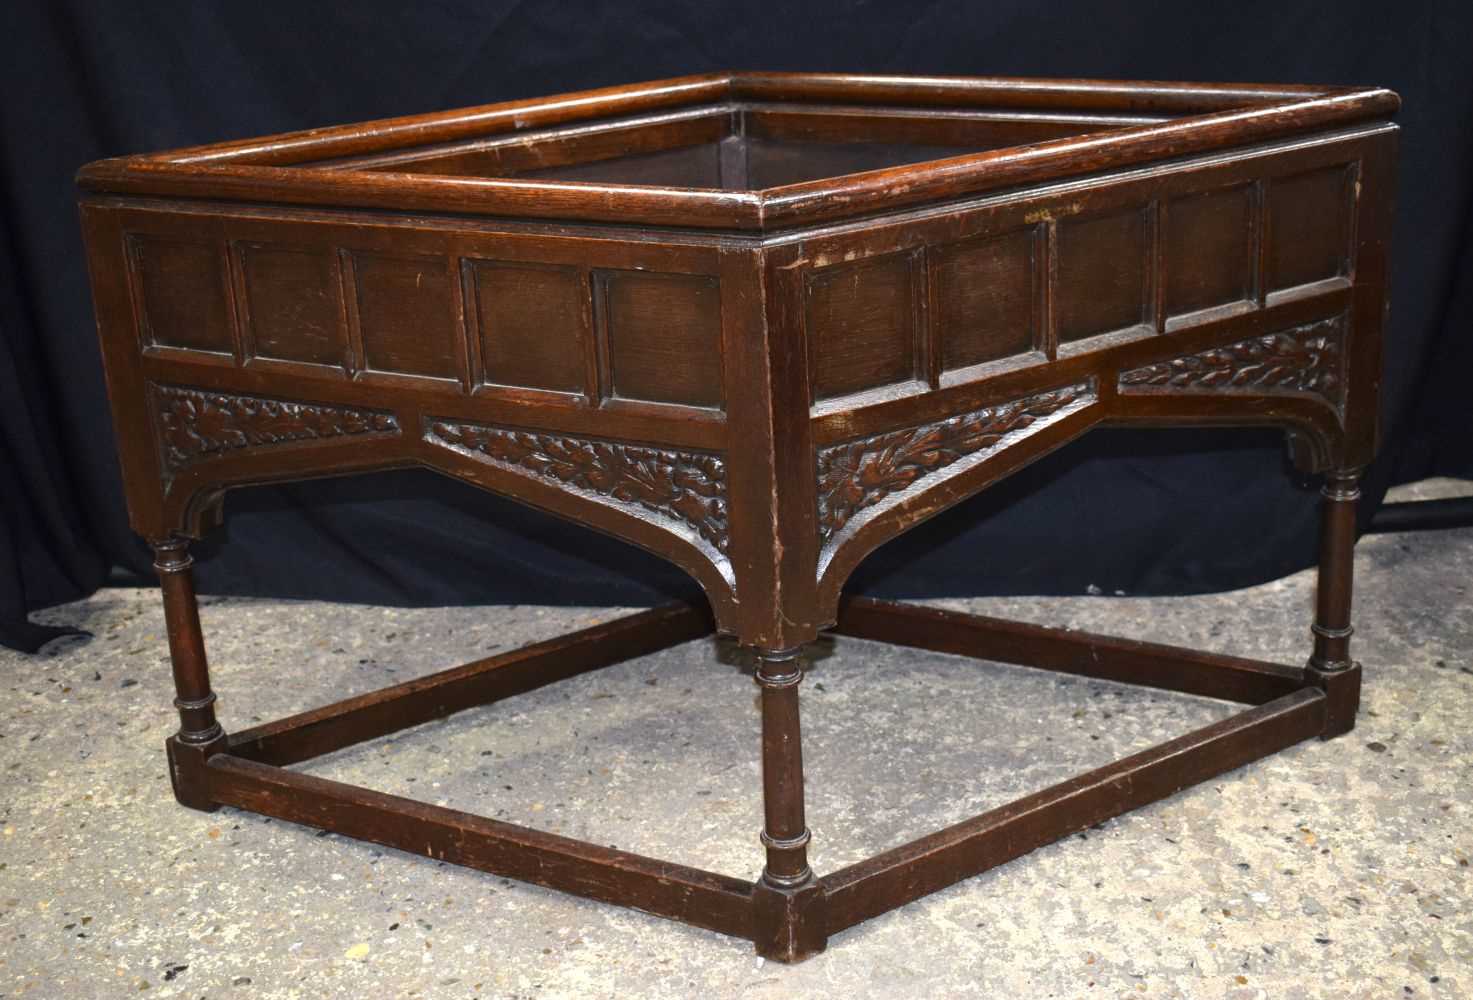 An unusual 19th Century Rhombus shaped carved mahogany planter 57 x 104 x 60 cm - Image 2 of 8